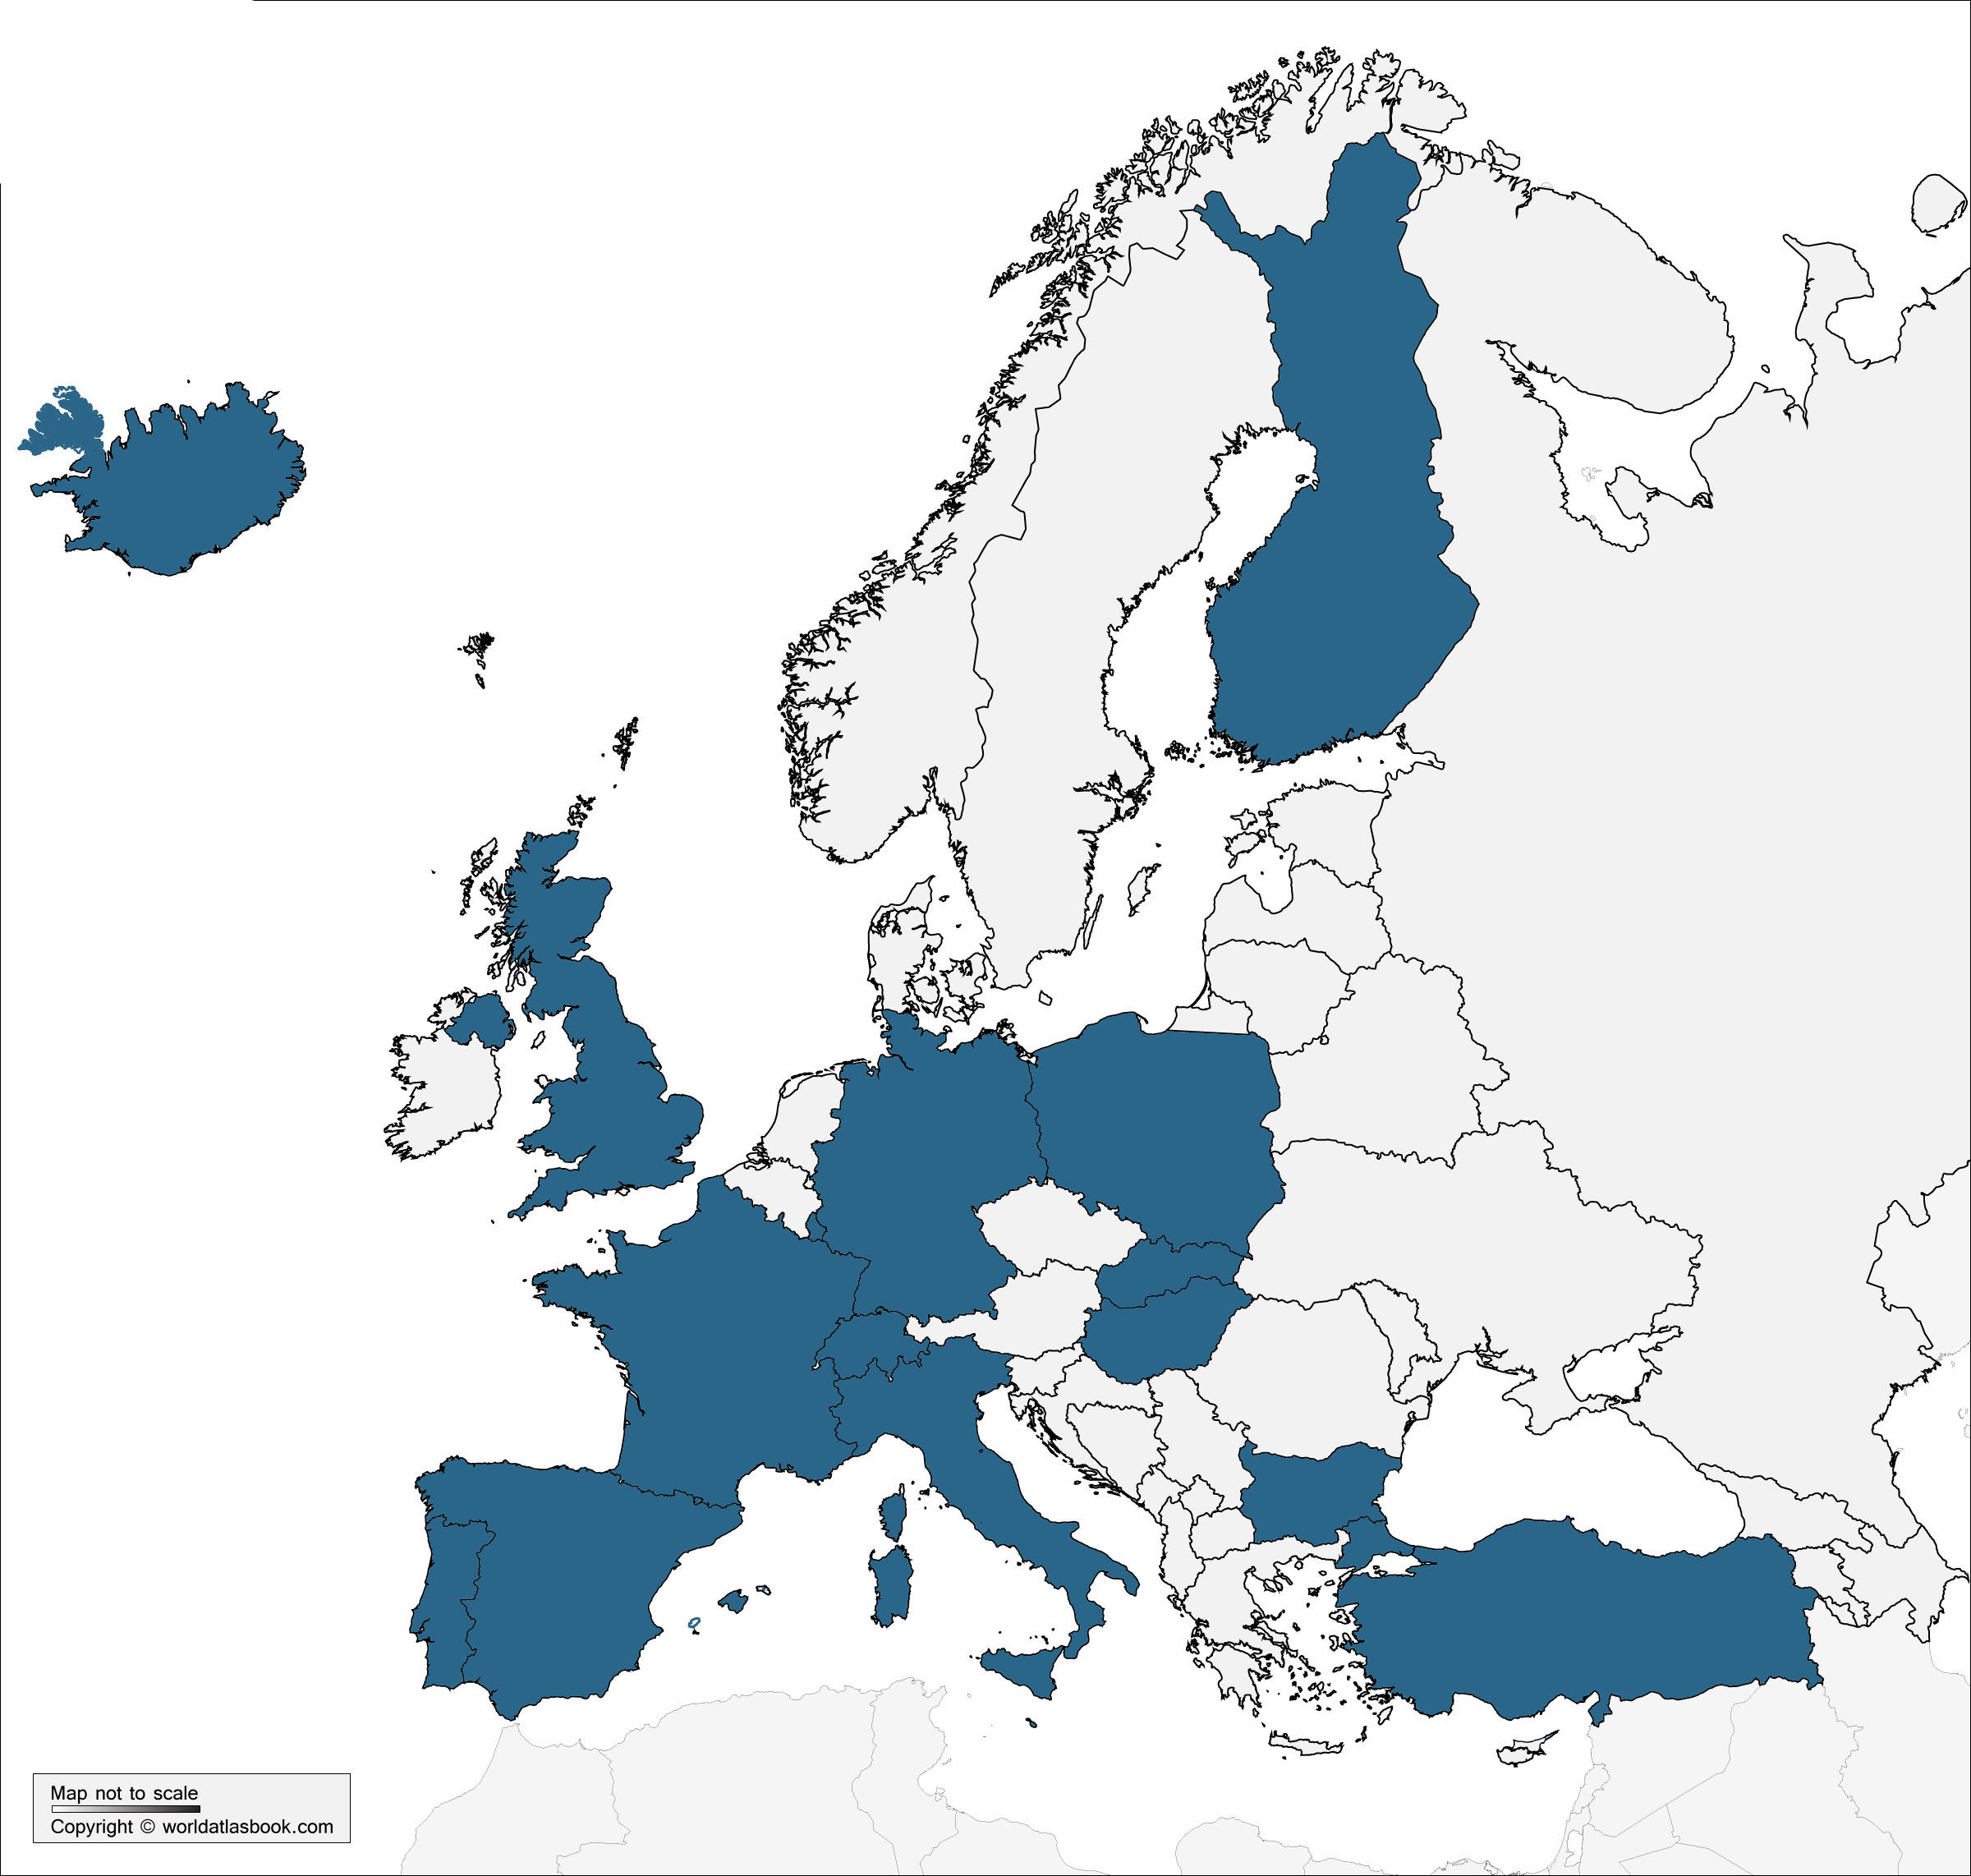 Countries participated in STSMs